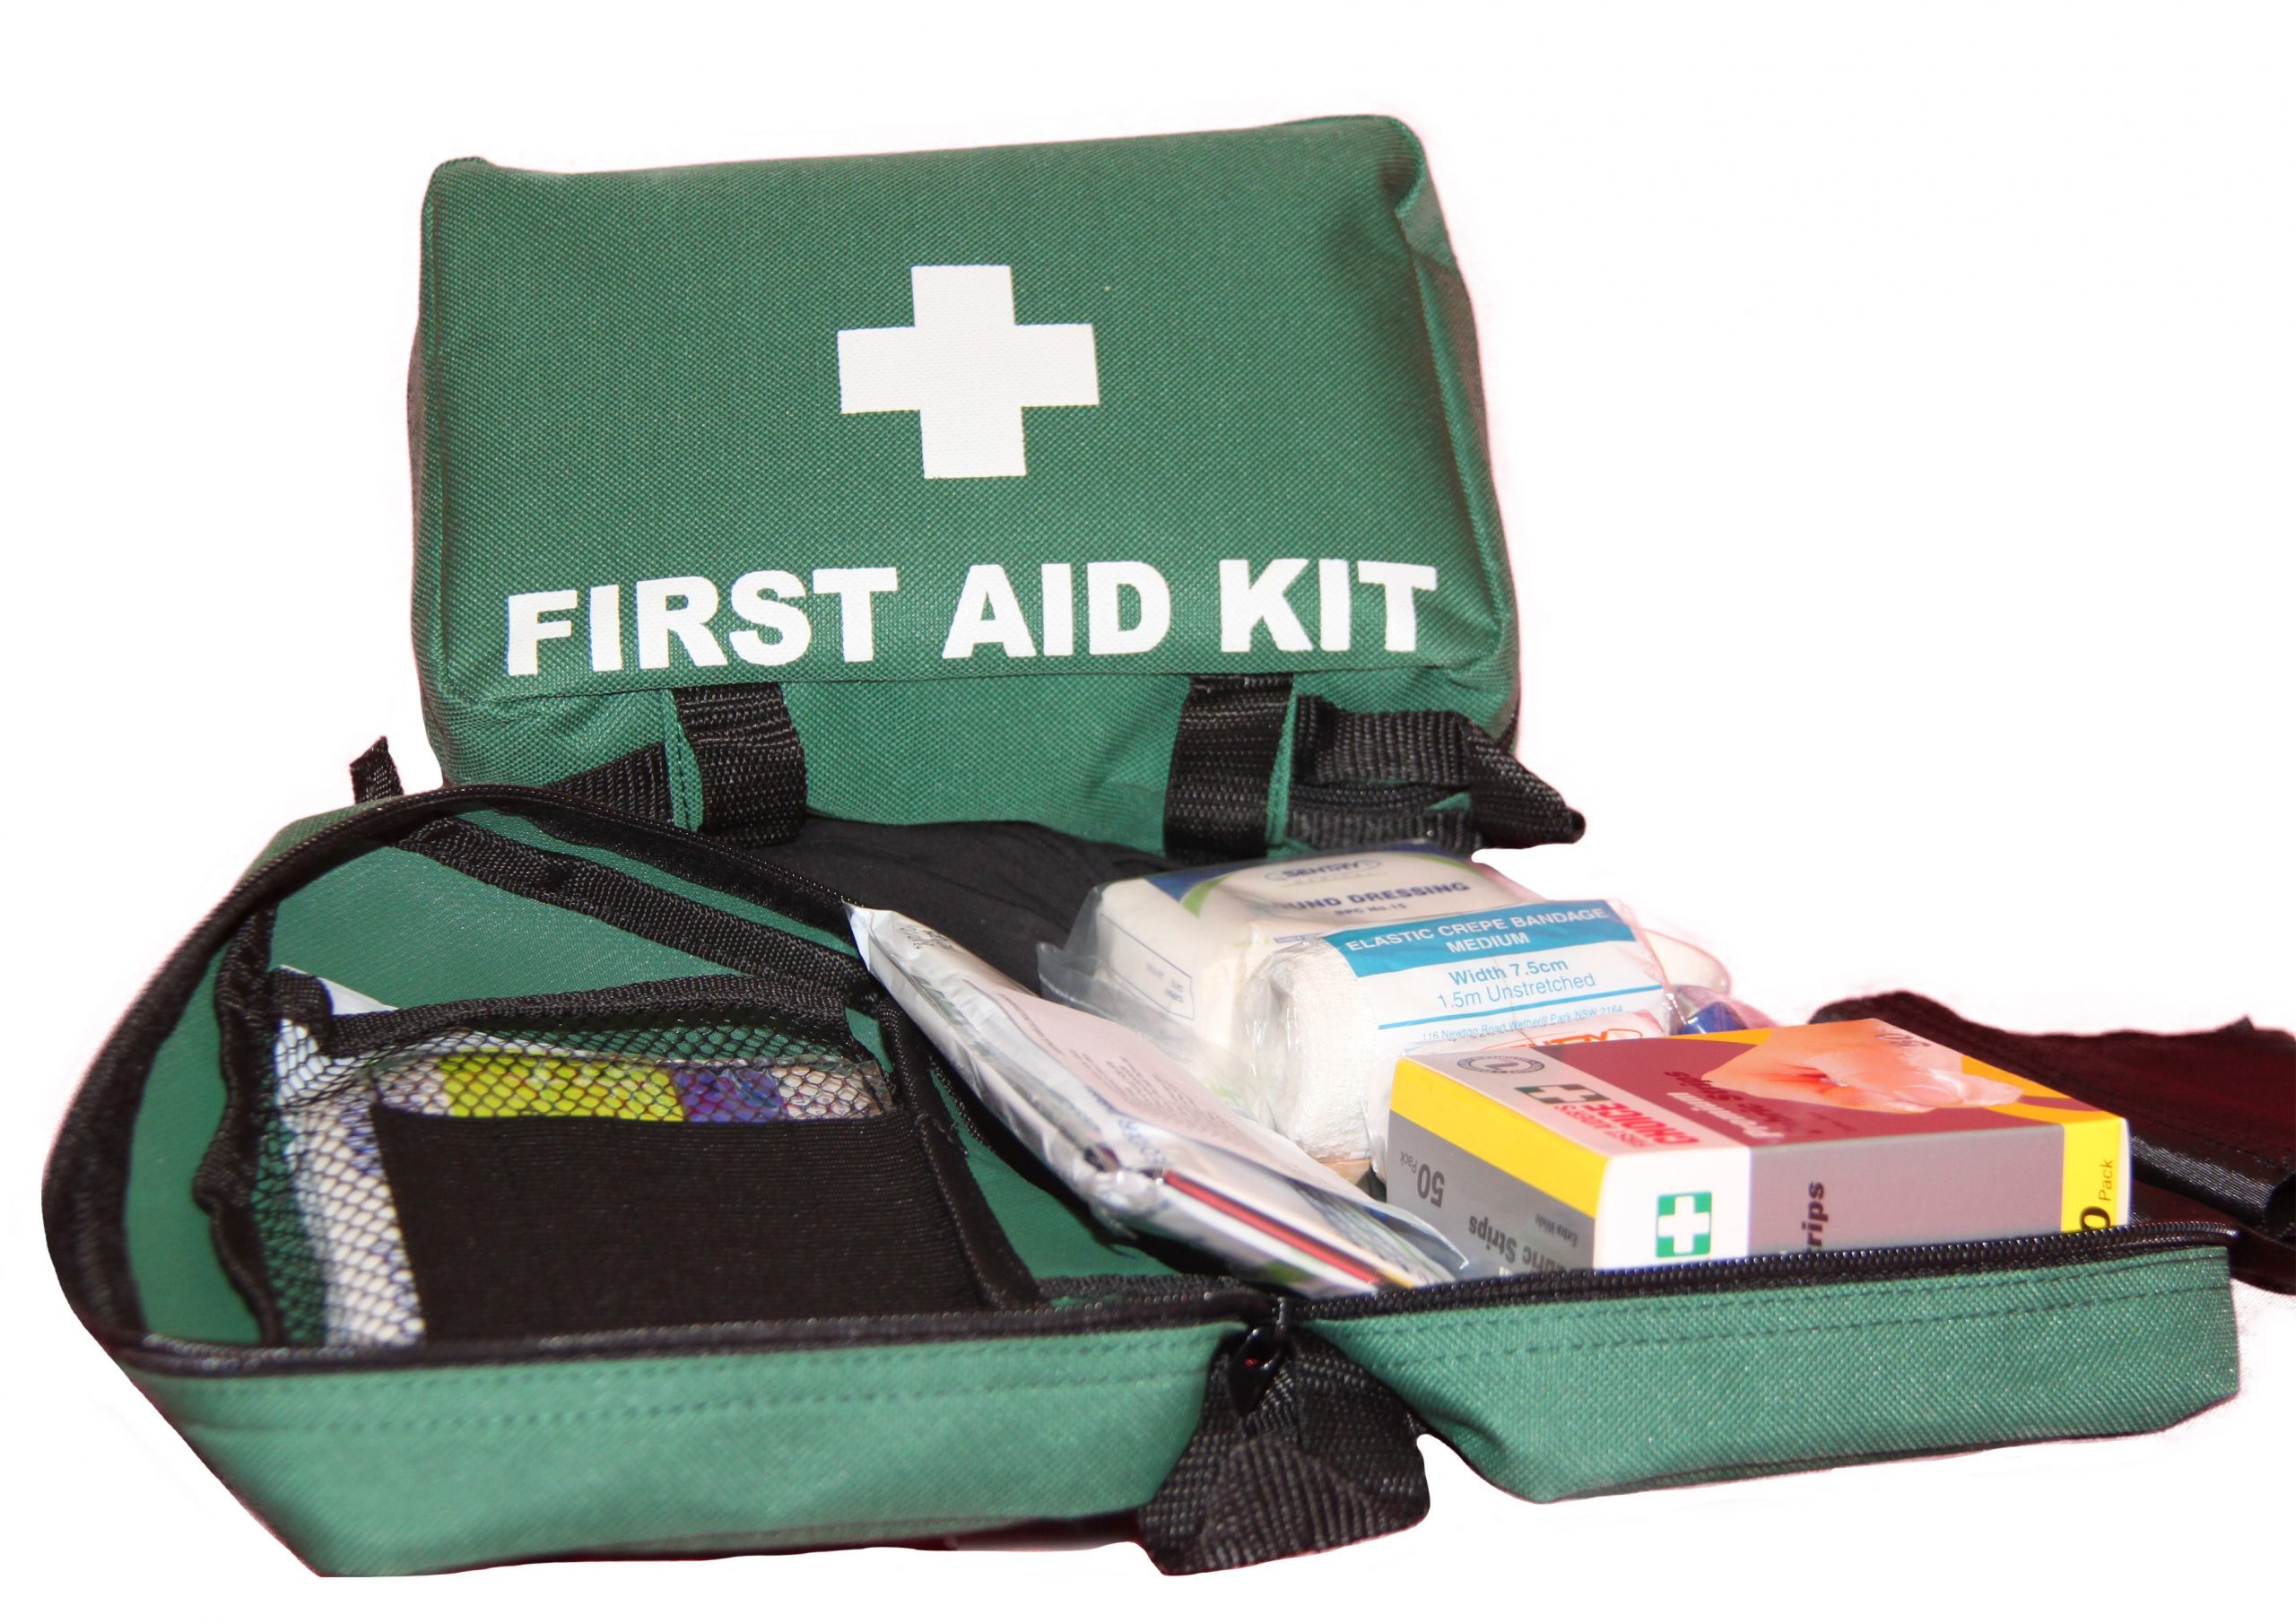 Small-Sized Emergency First Aid Kits For Cars, Trucks & Vans (19